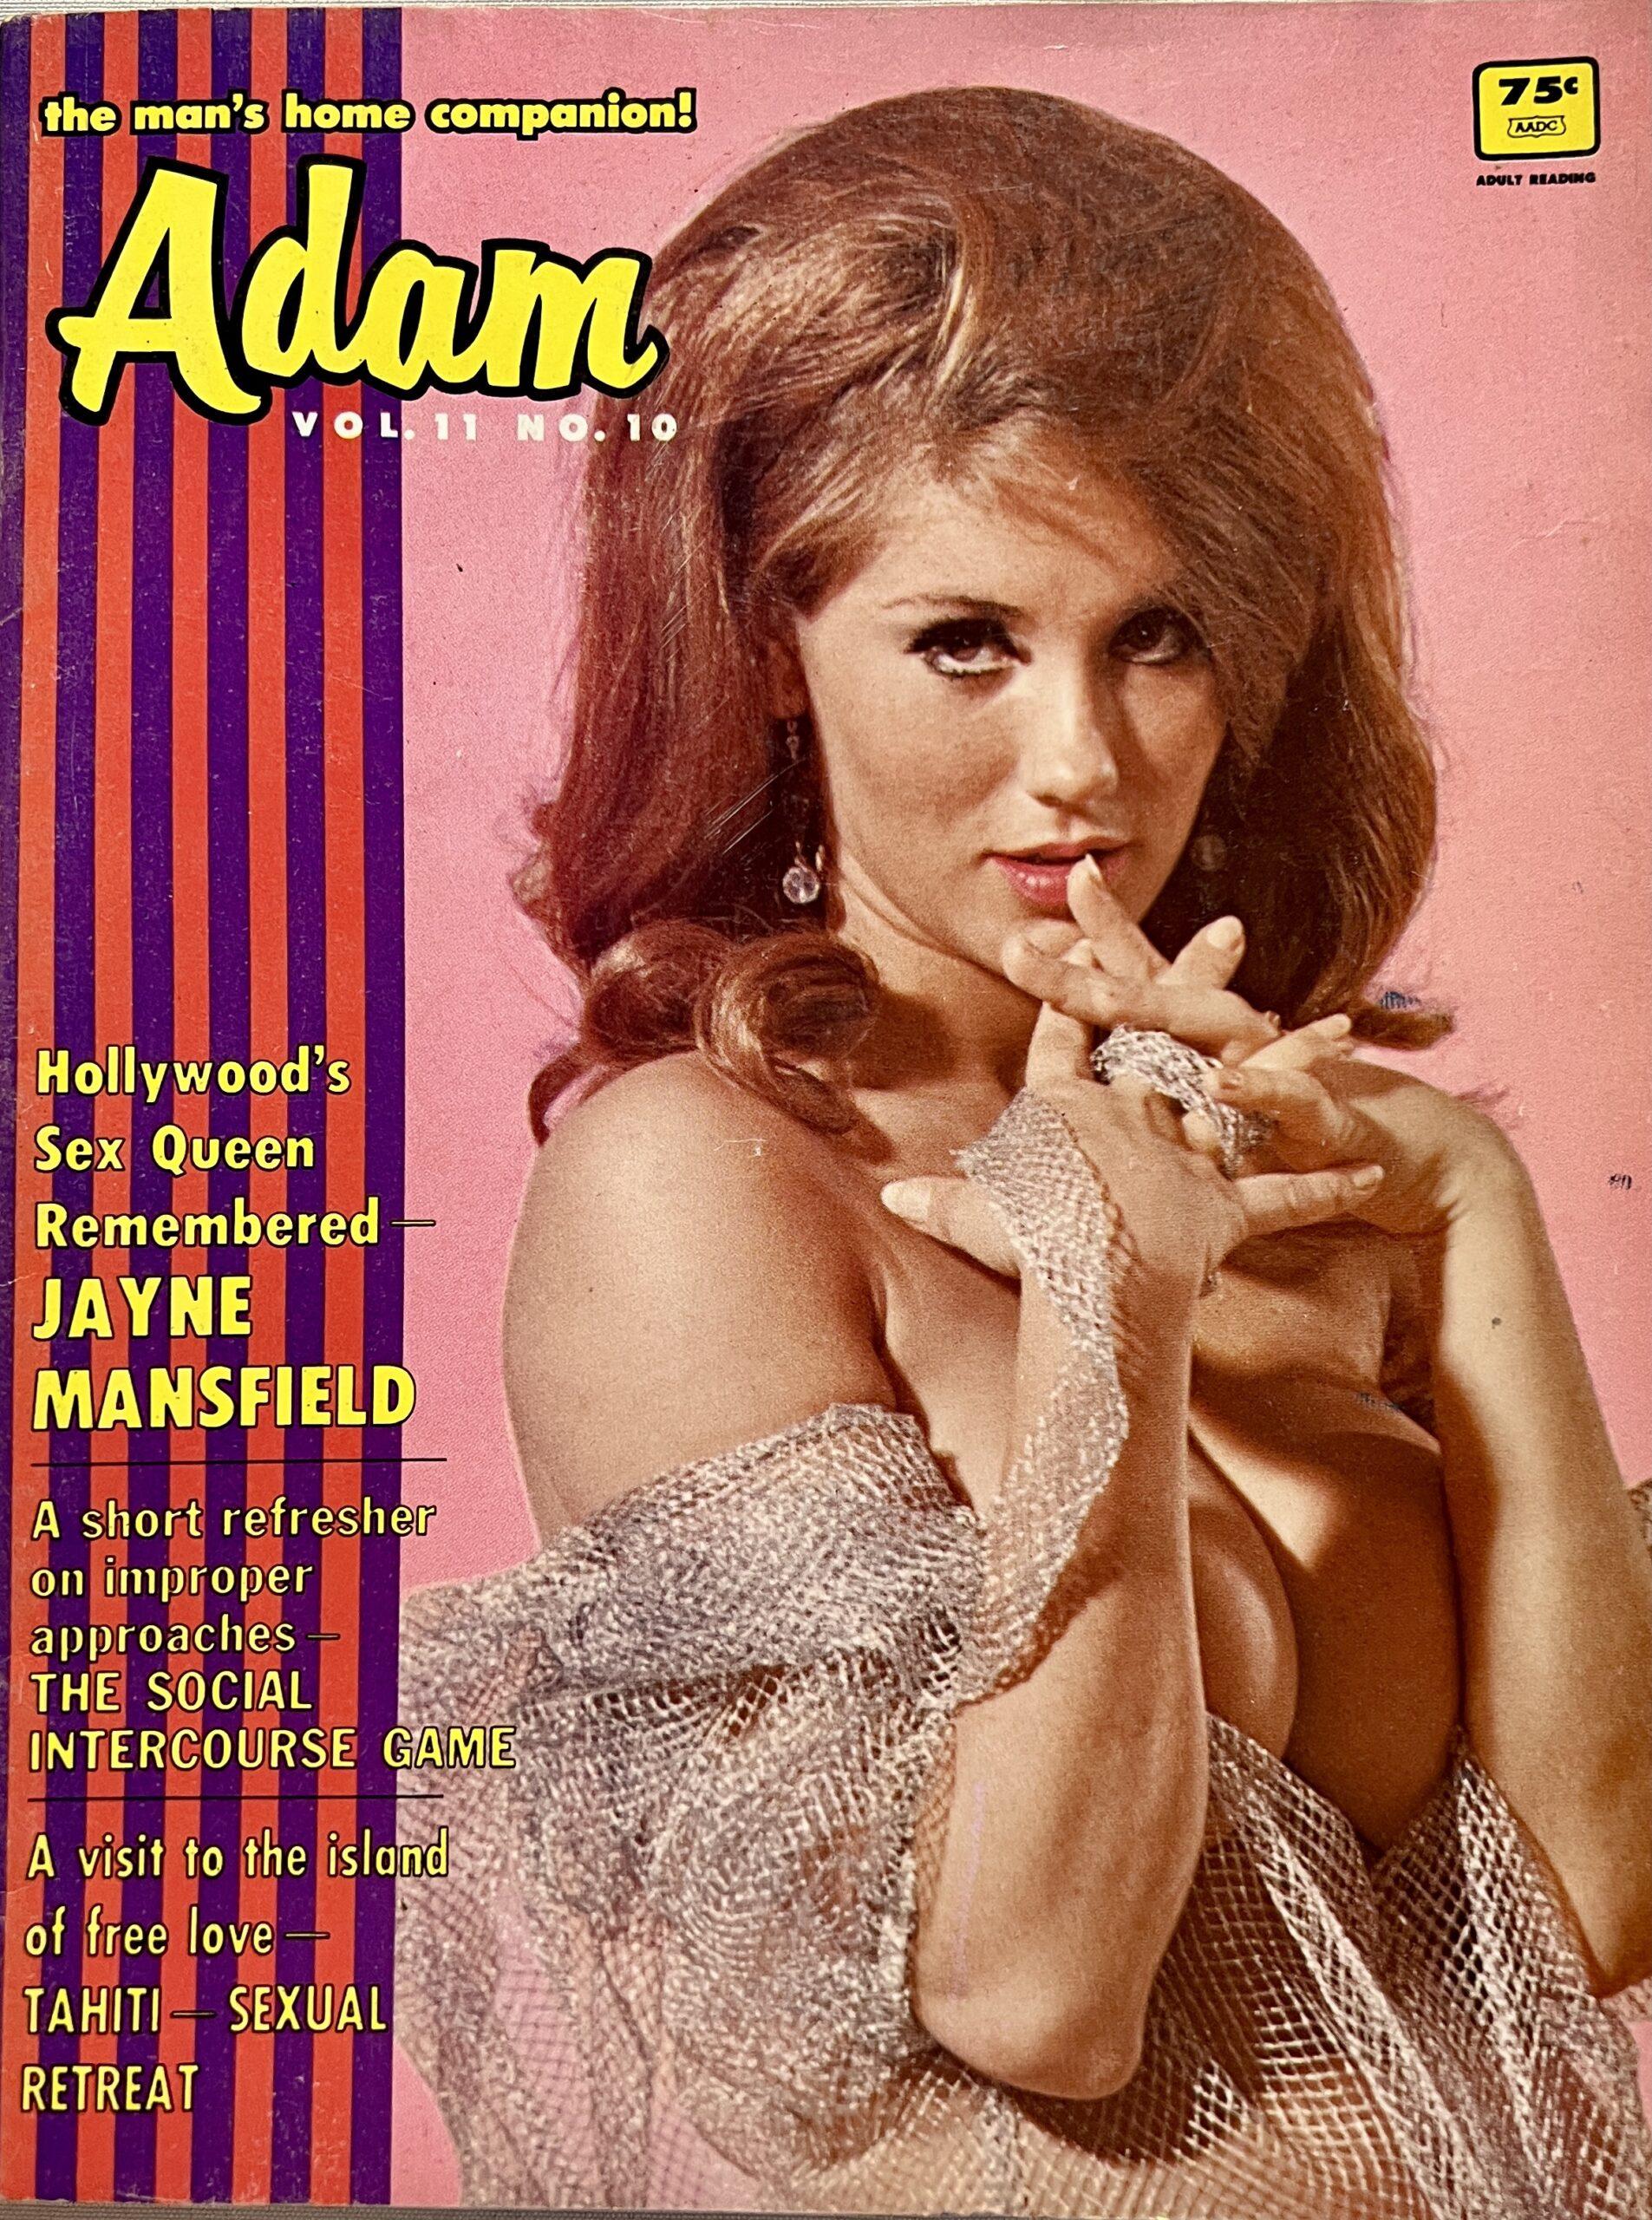 Adam 11/10 October 1967 Adult Swingers and Personals pic